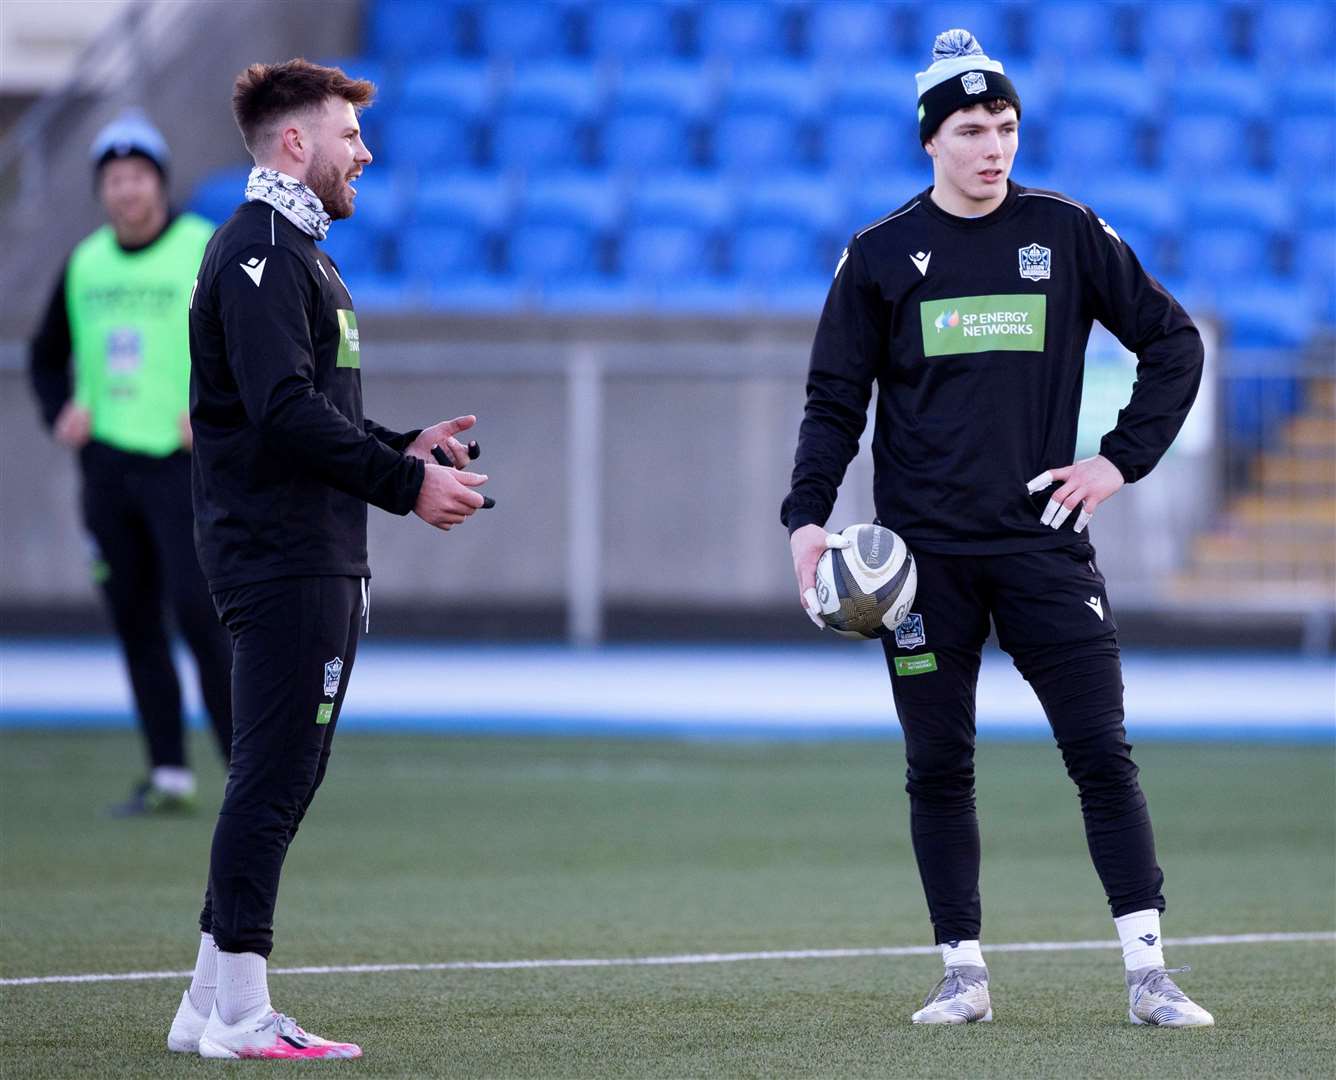 Jamie Dobie has been included in the Scotland 6 Nations squad as a training player, as the Highland teenager continues building experience at the highest level. Craig Williamson - SNS Group / SRU